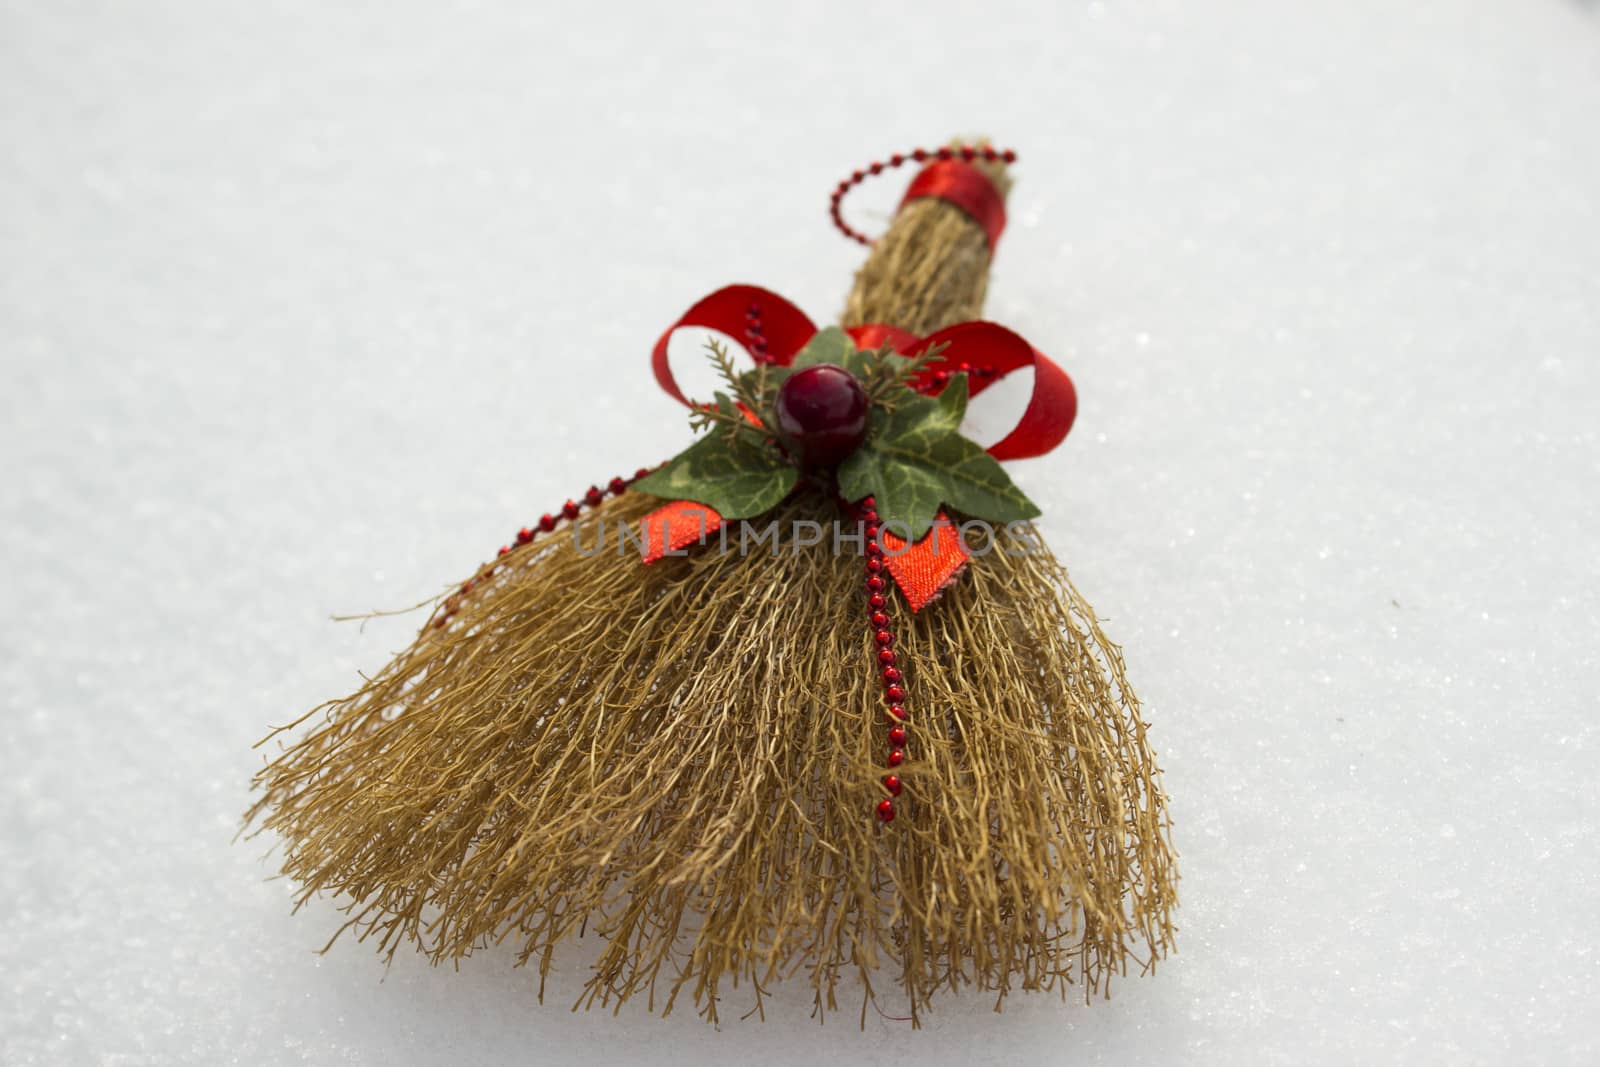 Toy broom with red ribbon and holiday ornaments laying around the snow.